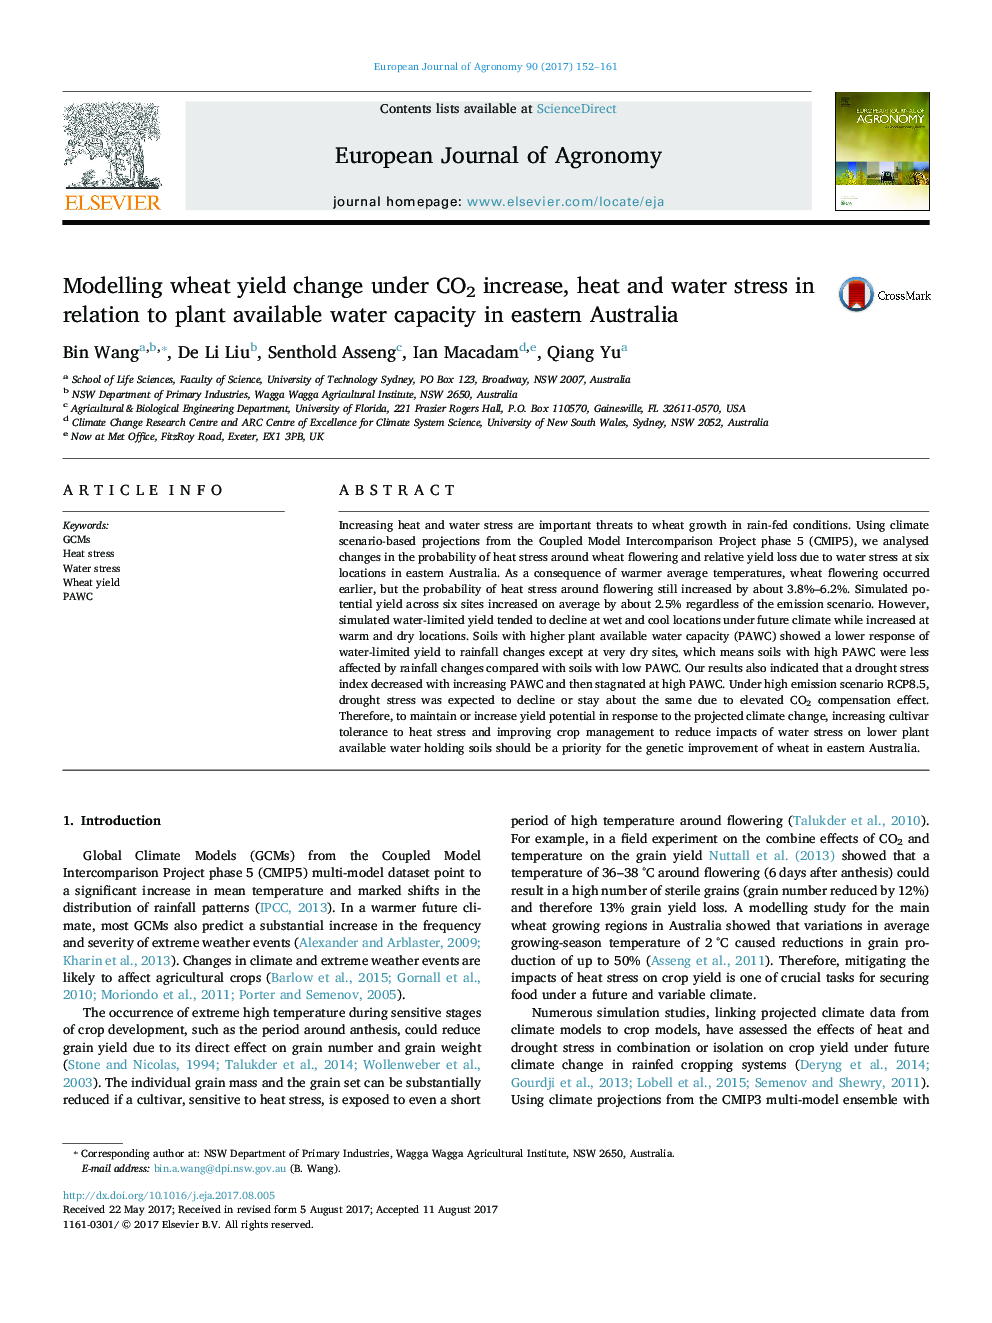 Modelling wheat yield change under CO2 increase, heat and water stress in relation to plant available water capacity in eastern Australia